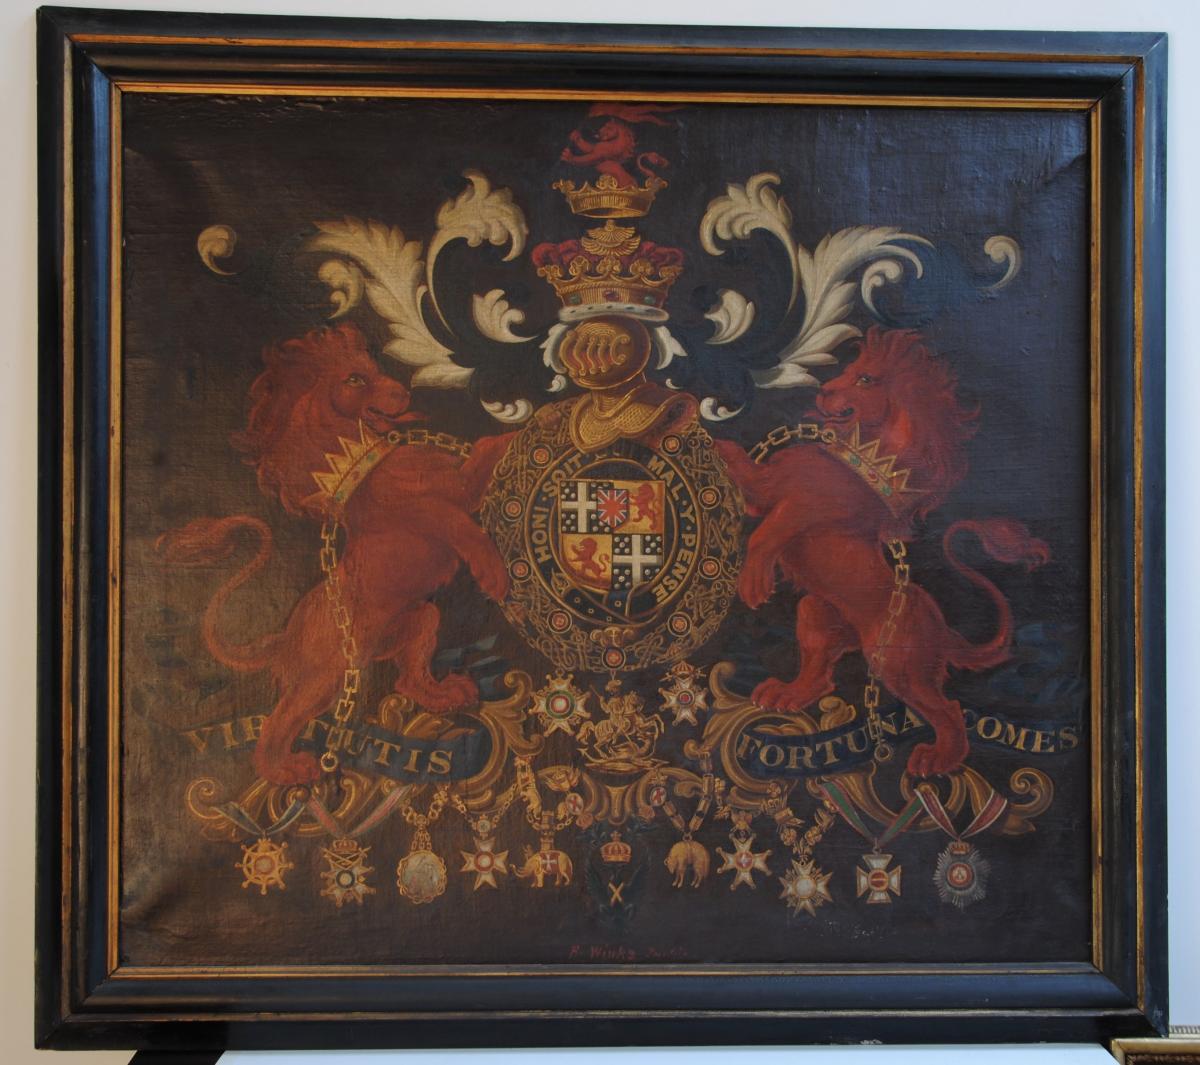 Coat of Arms for the Duke of Wellington